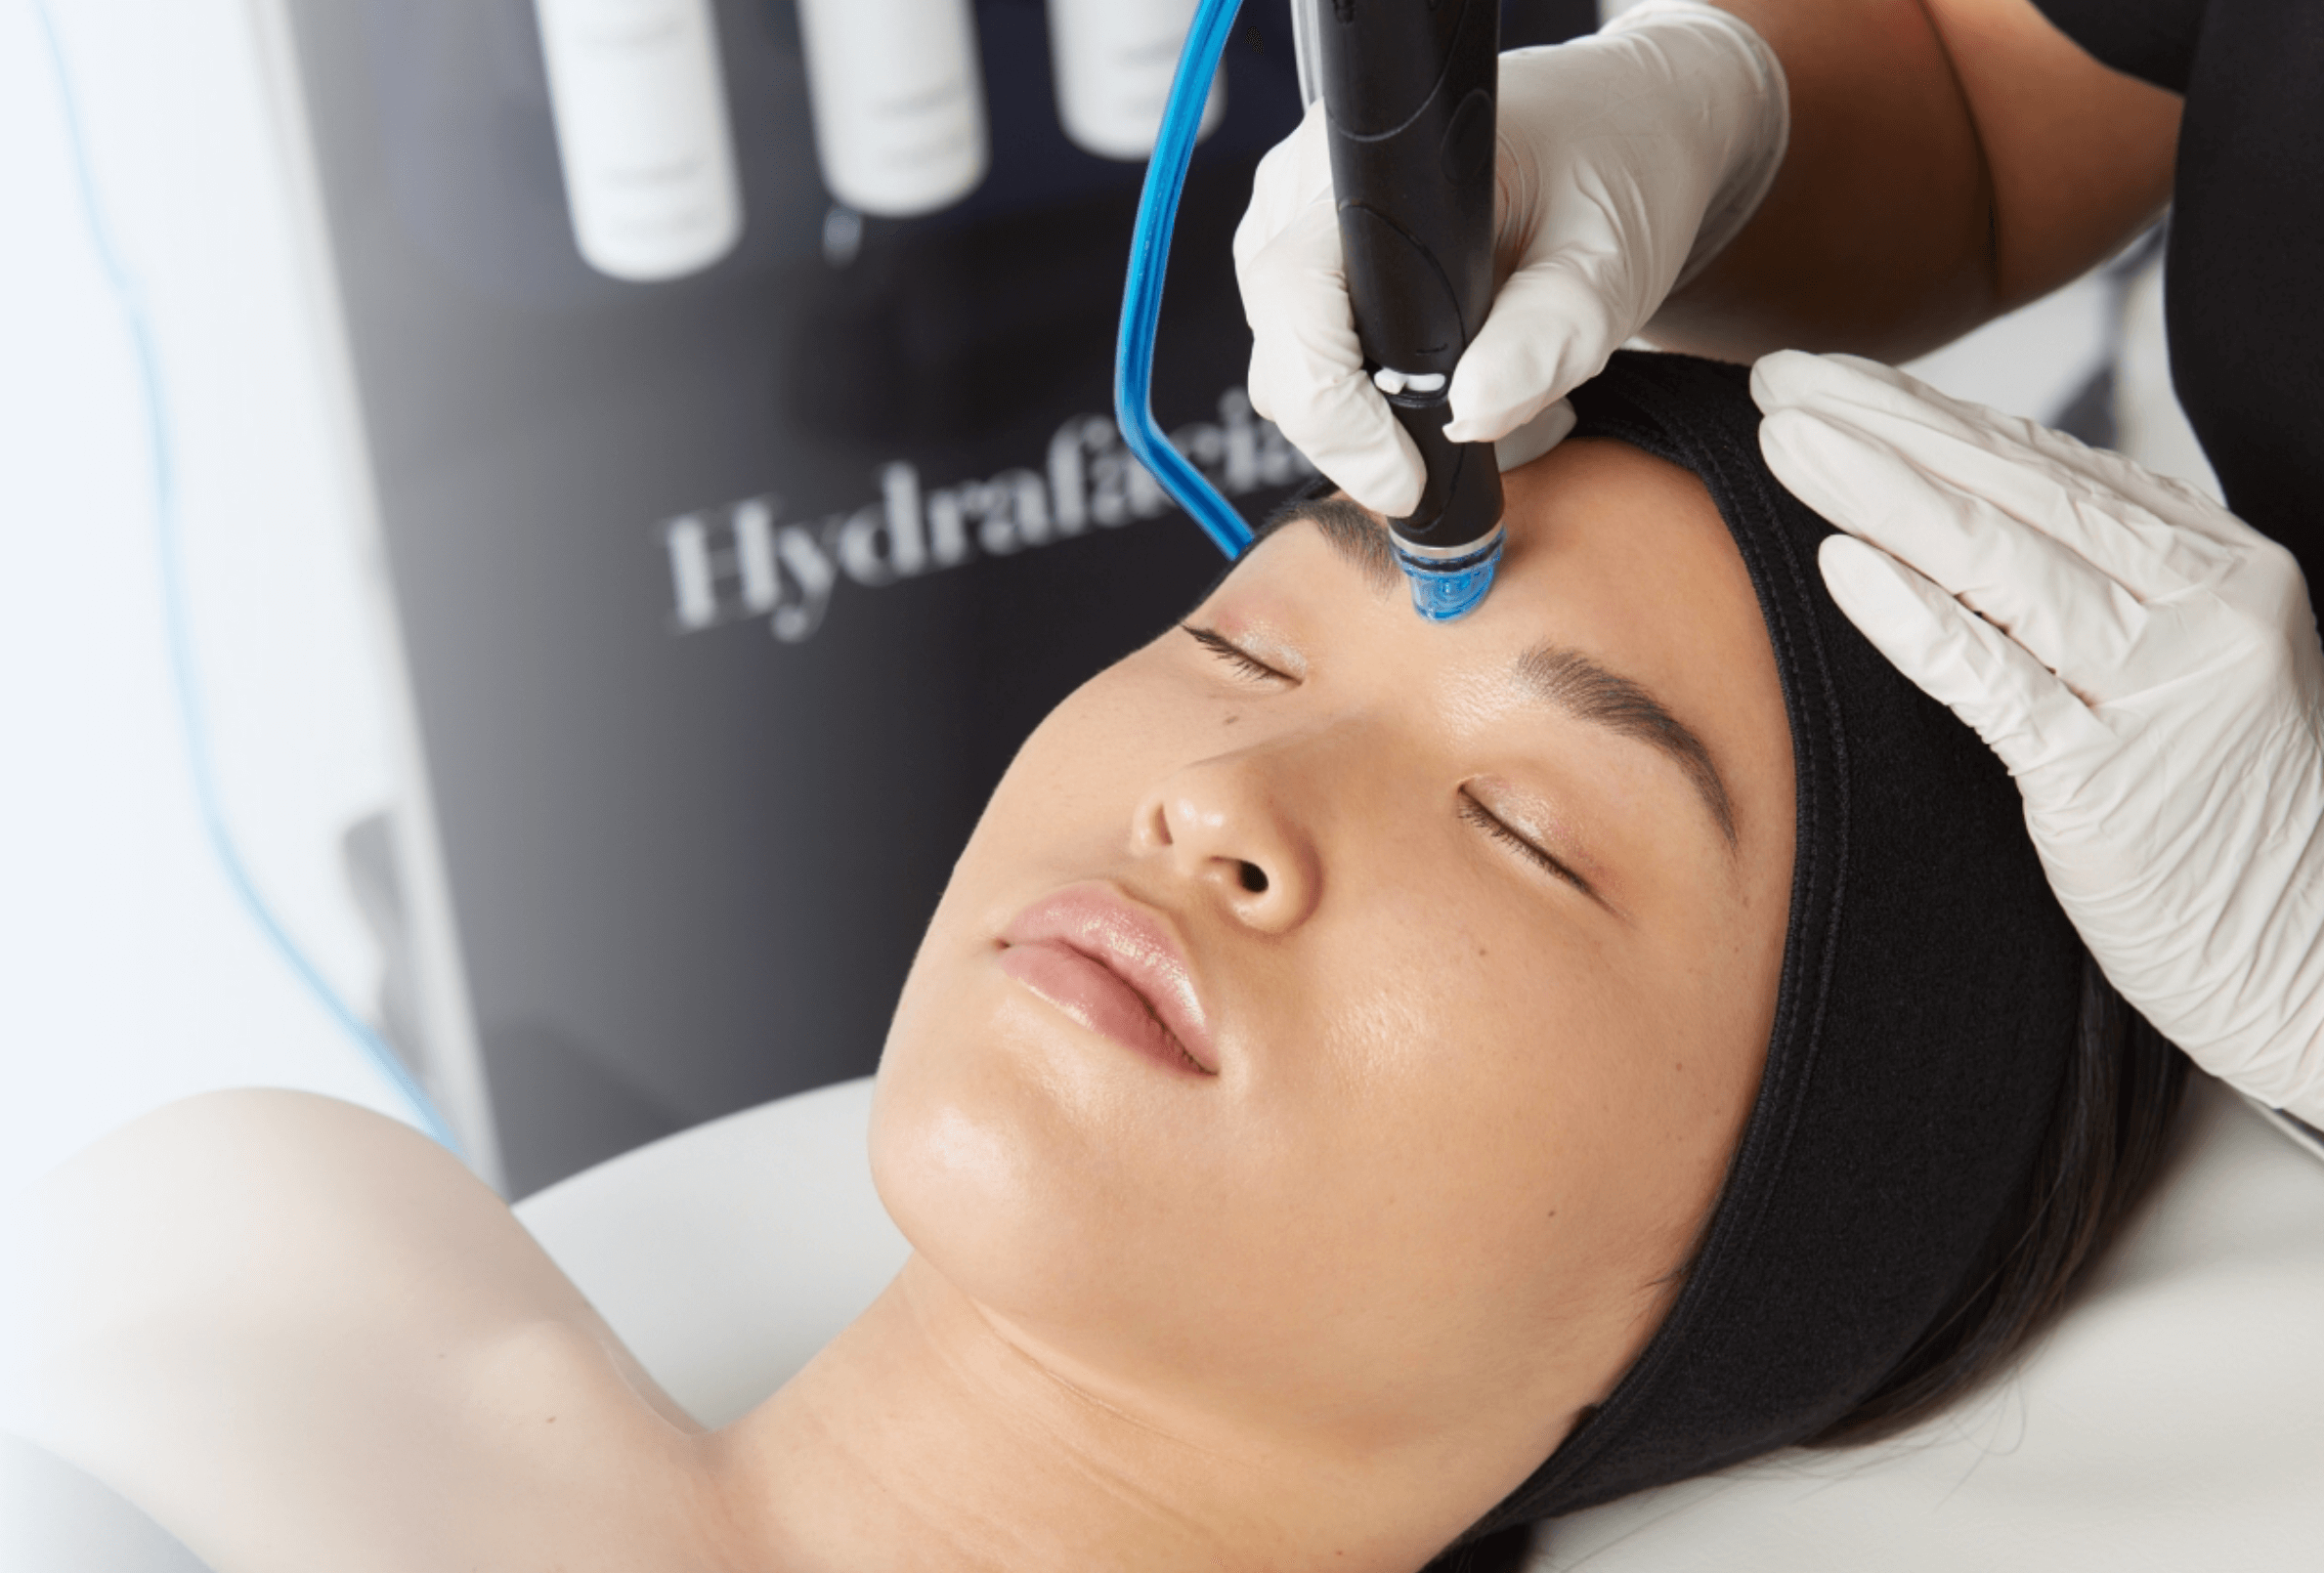 Hydrafacial | The Aesthetic House in Crystal River, FL